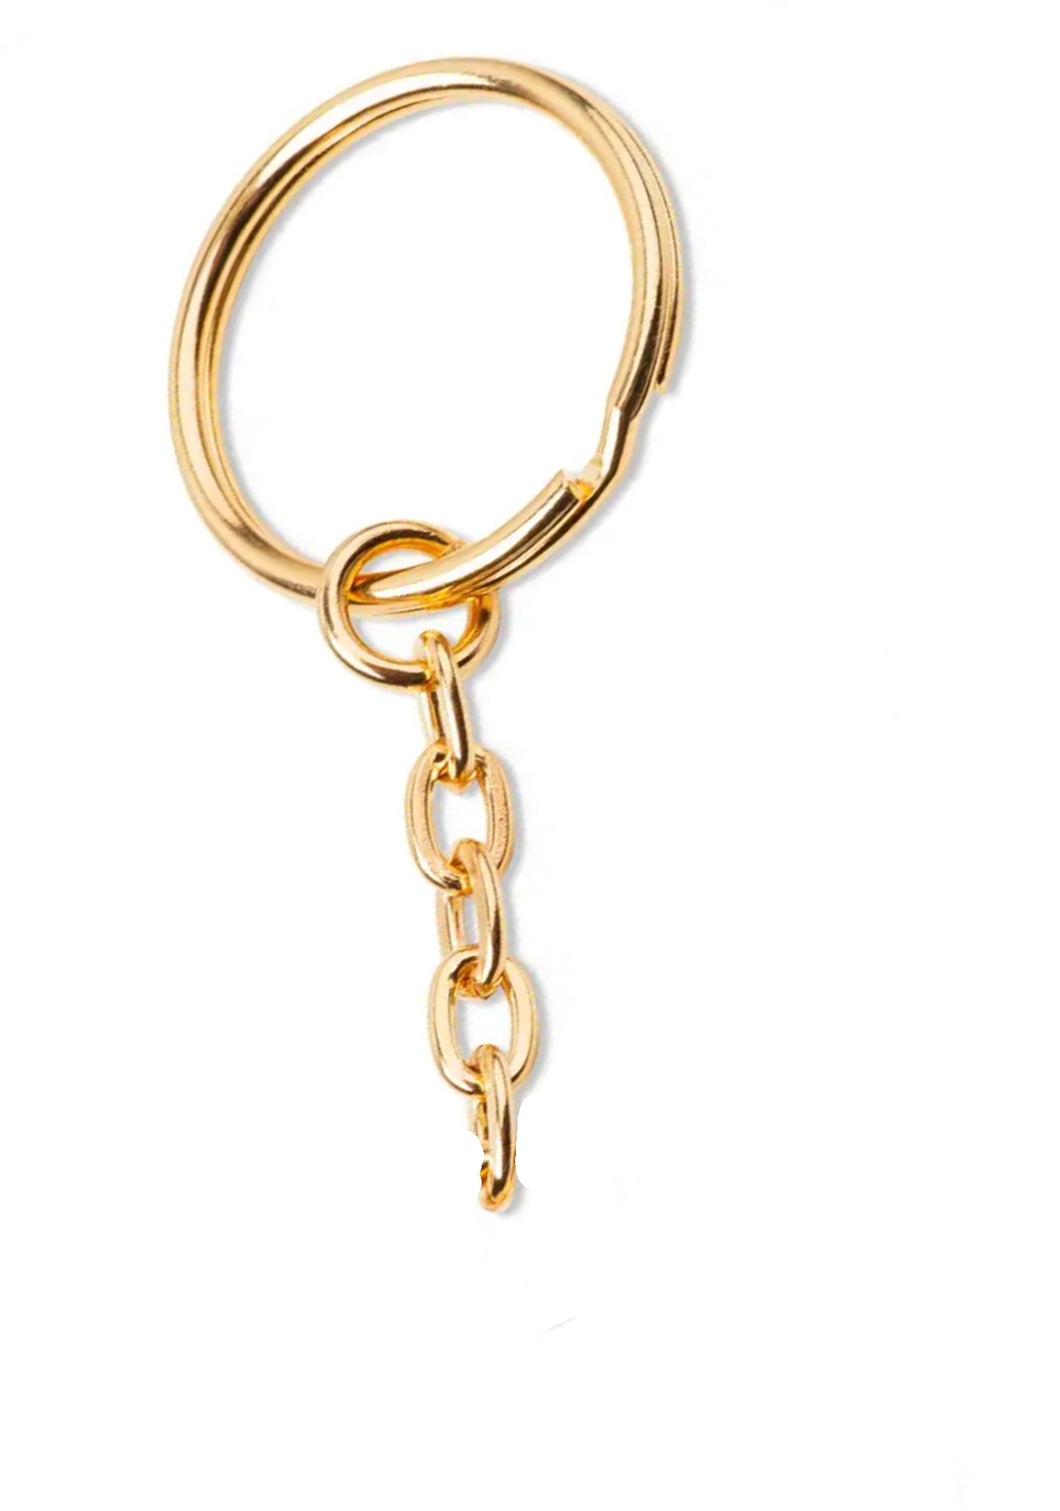 20 mm Gold Split Ring with Chain